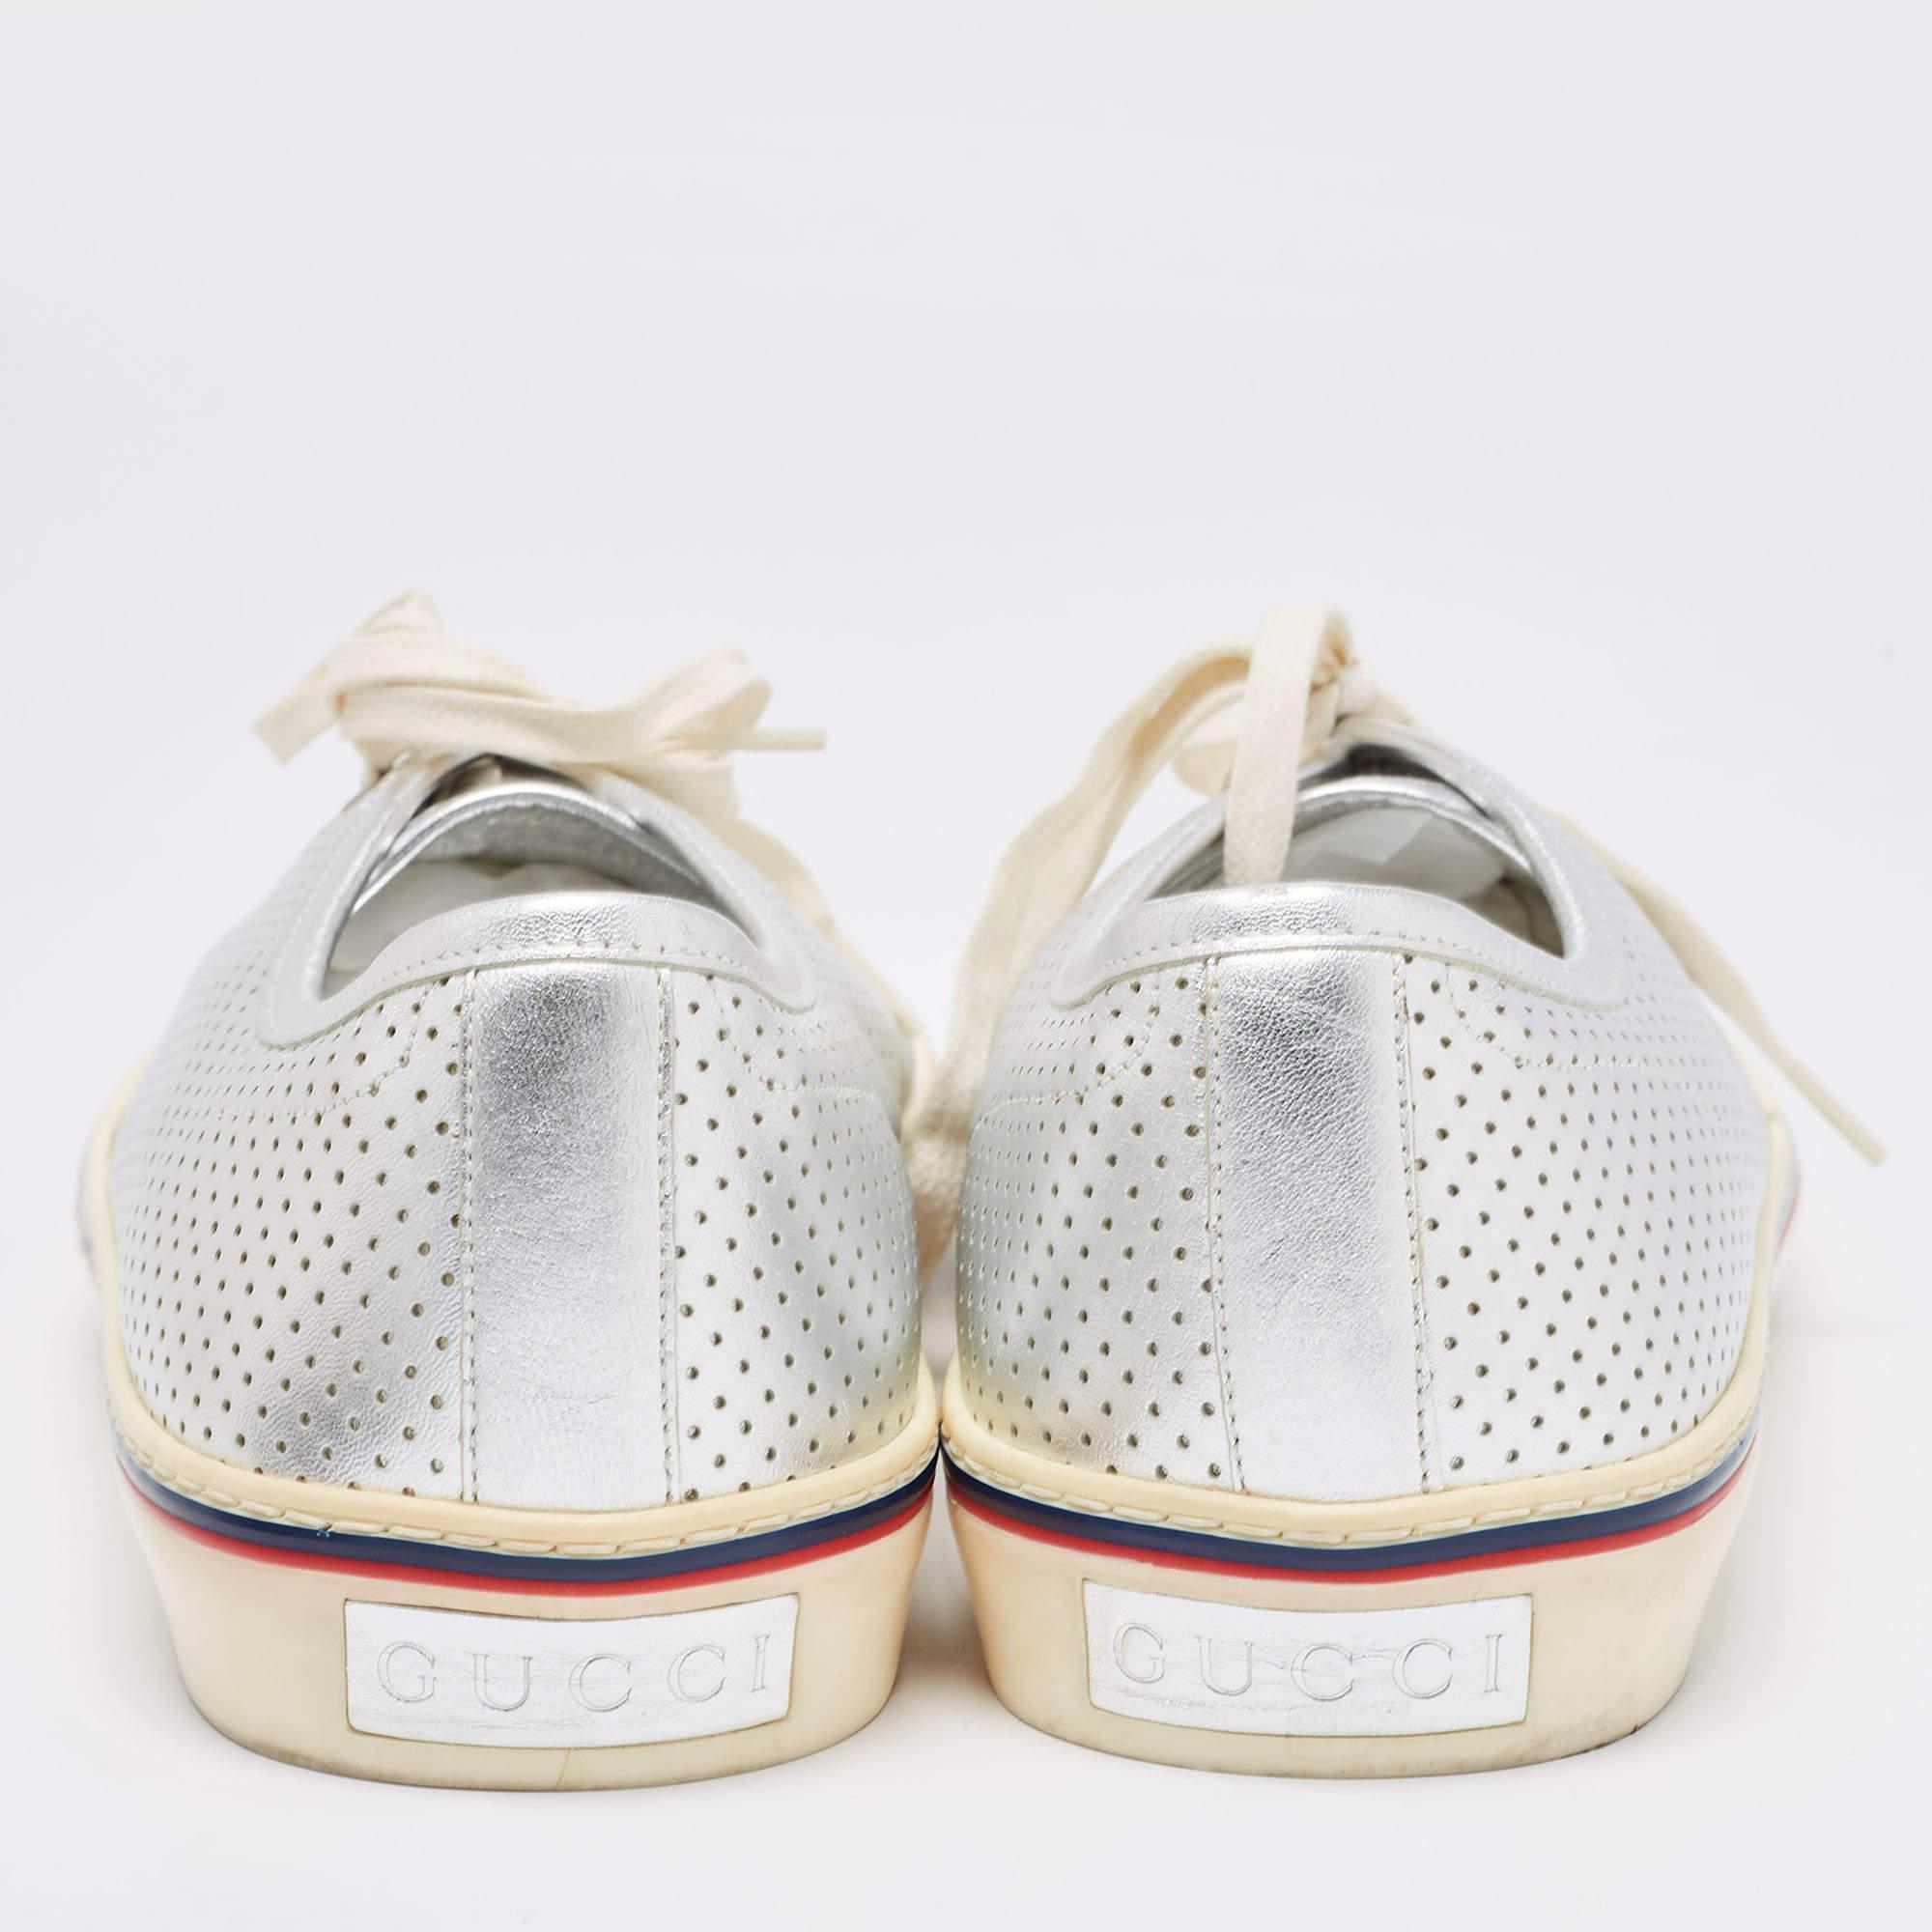 Gucci Silver Perforated Leather Low Top Sneakers Size 44.5 For Sale 2